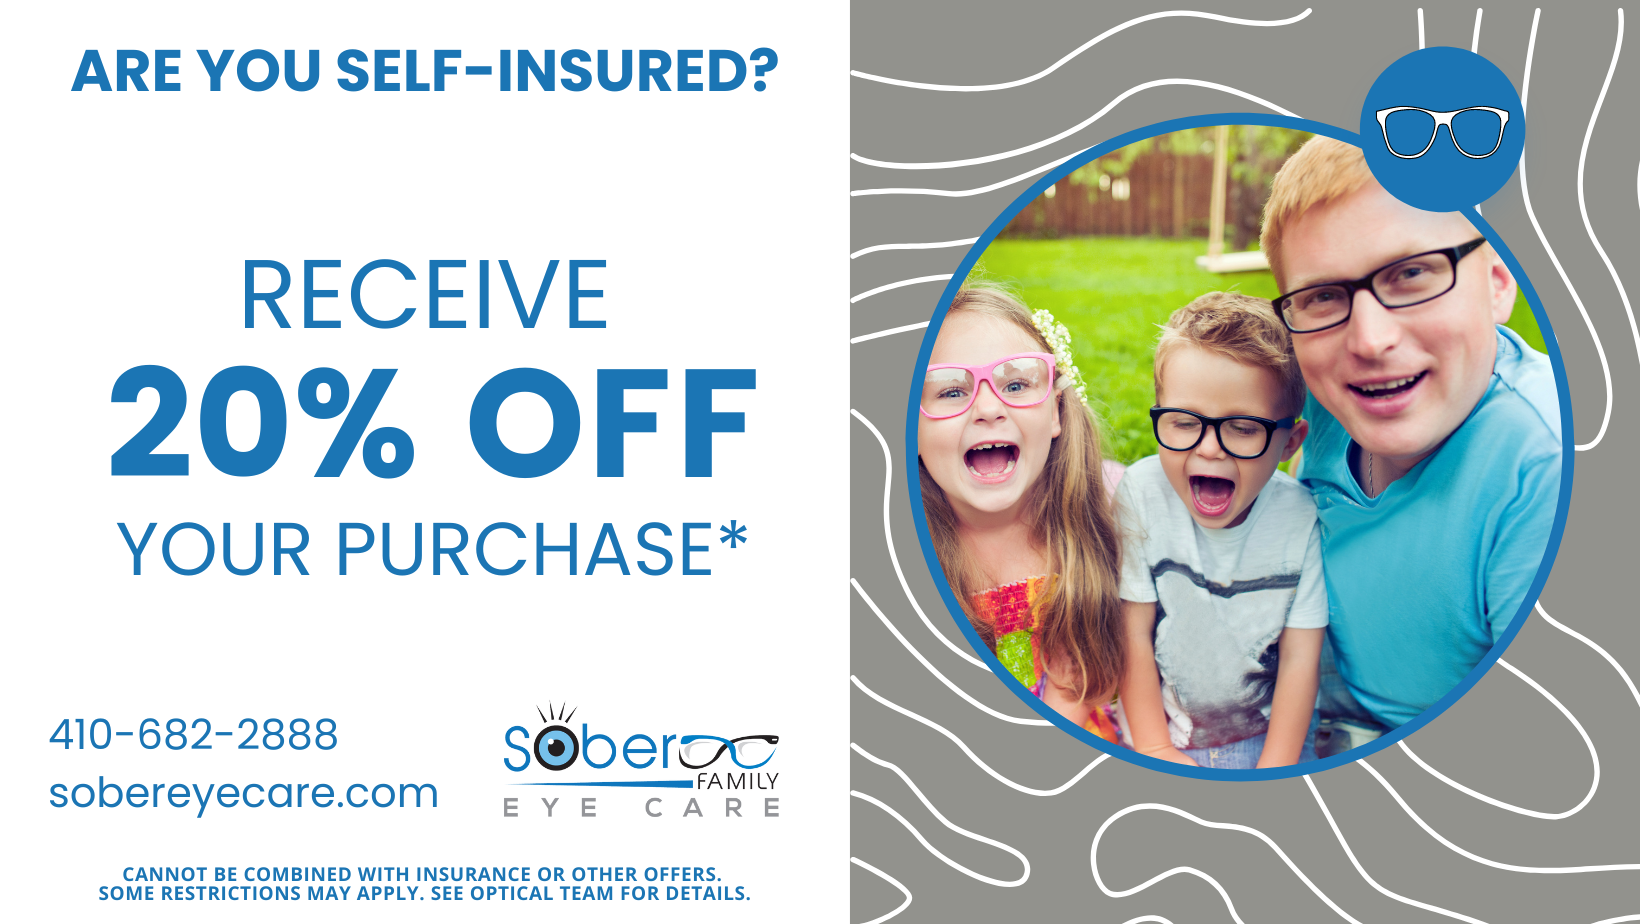 Sober Family Eyecare Self Insured Promotion Banners